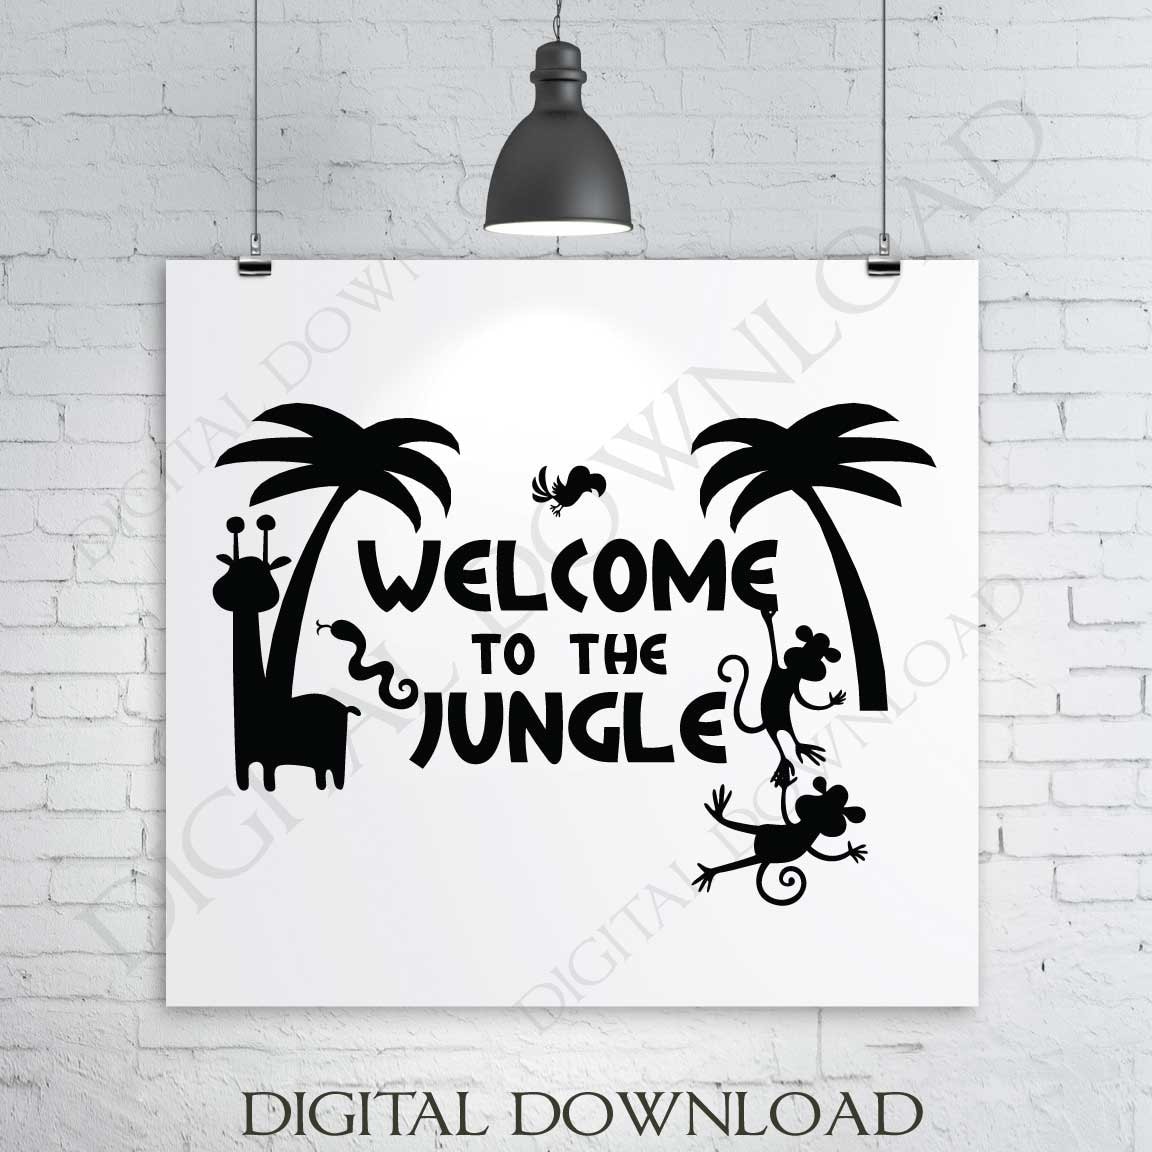 Download Jungle Theme Vector Digital Download Ready to use Digital